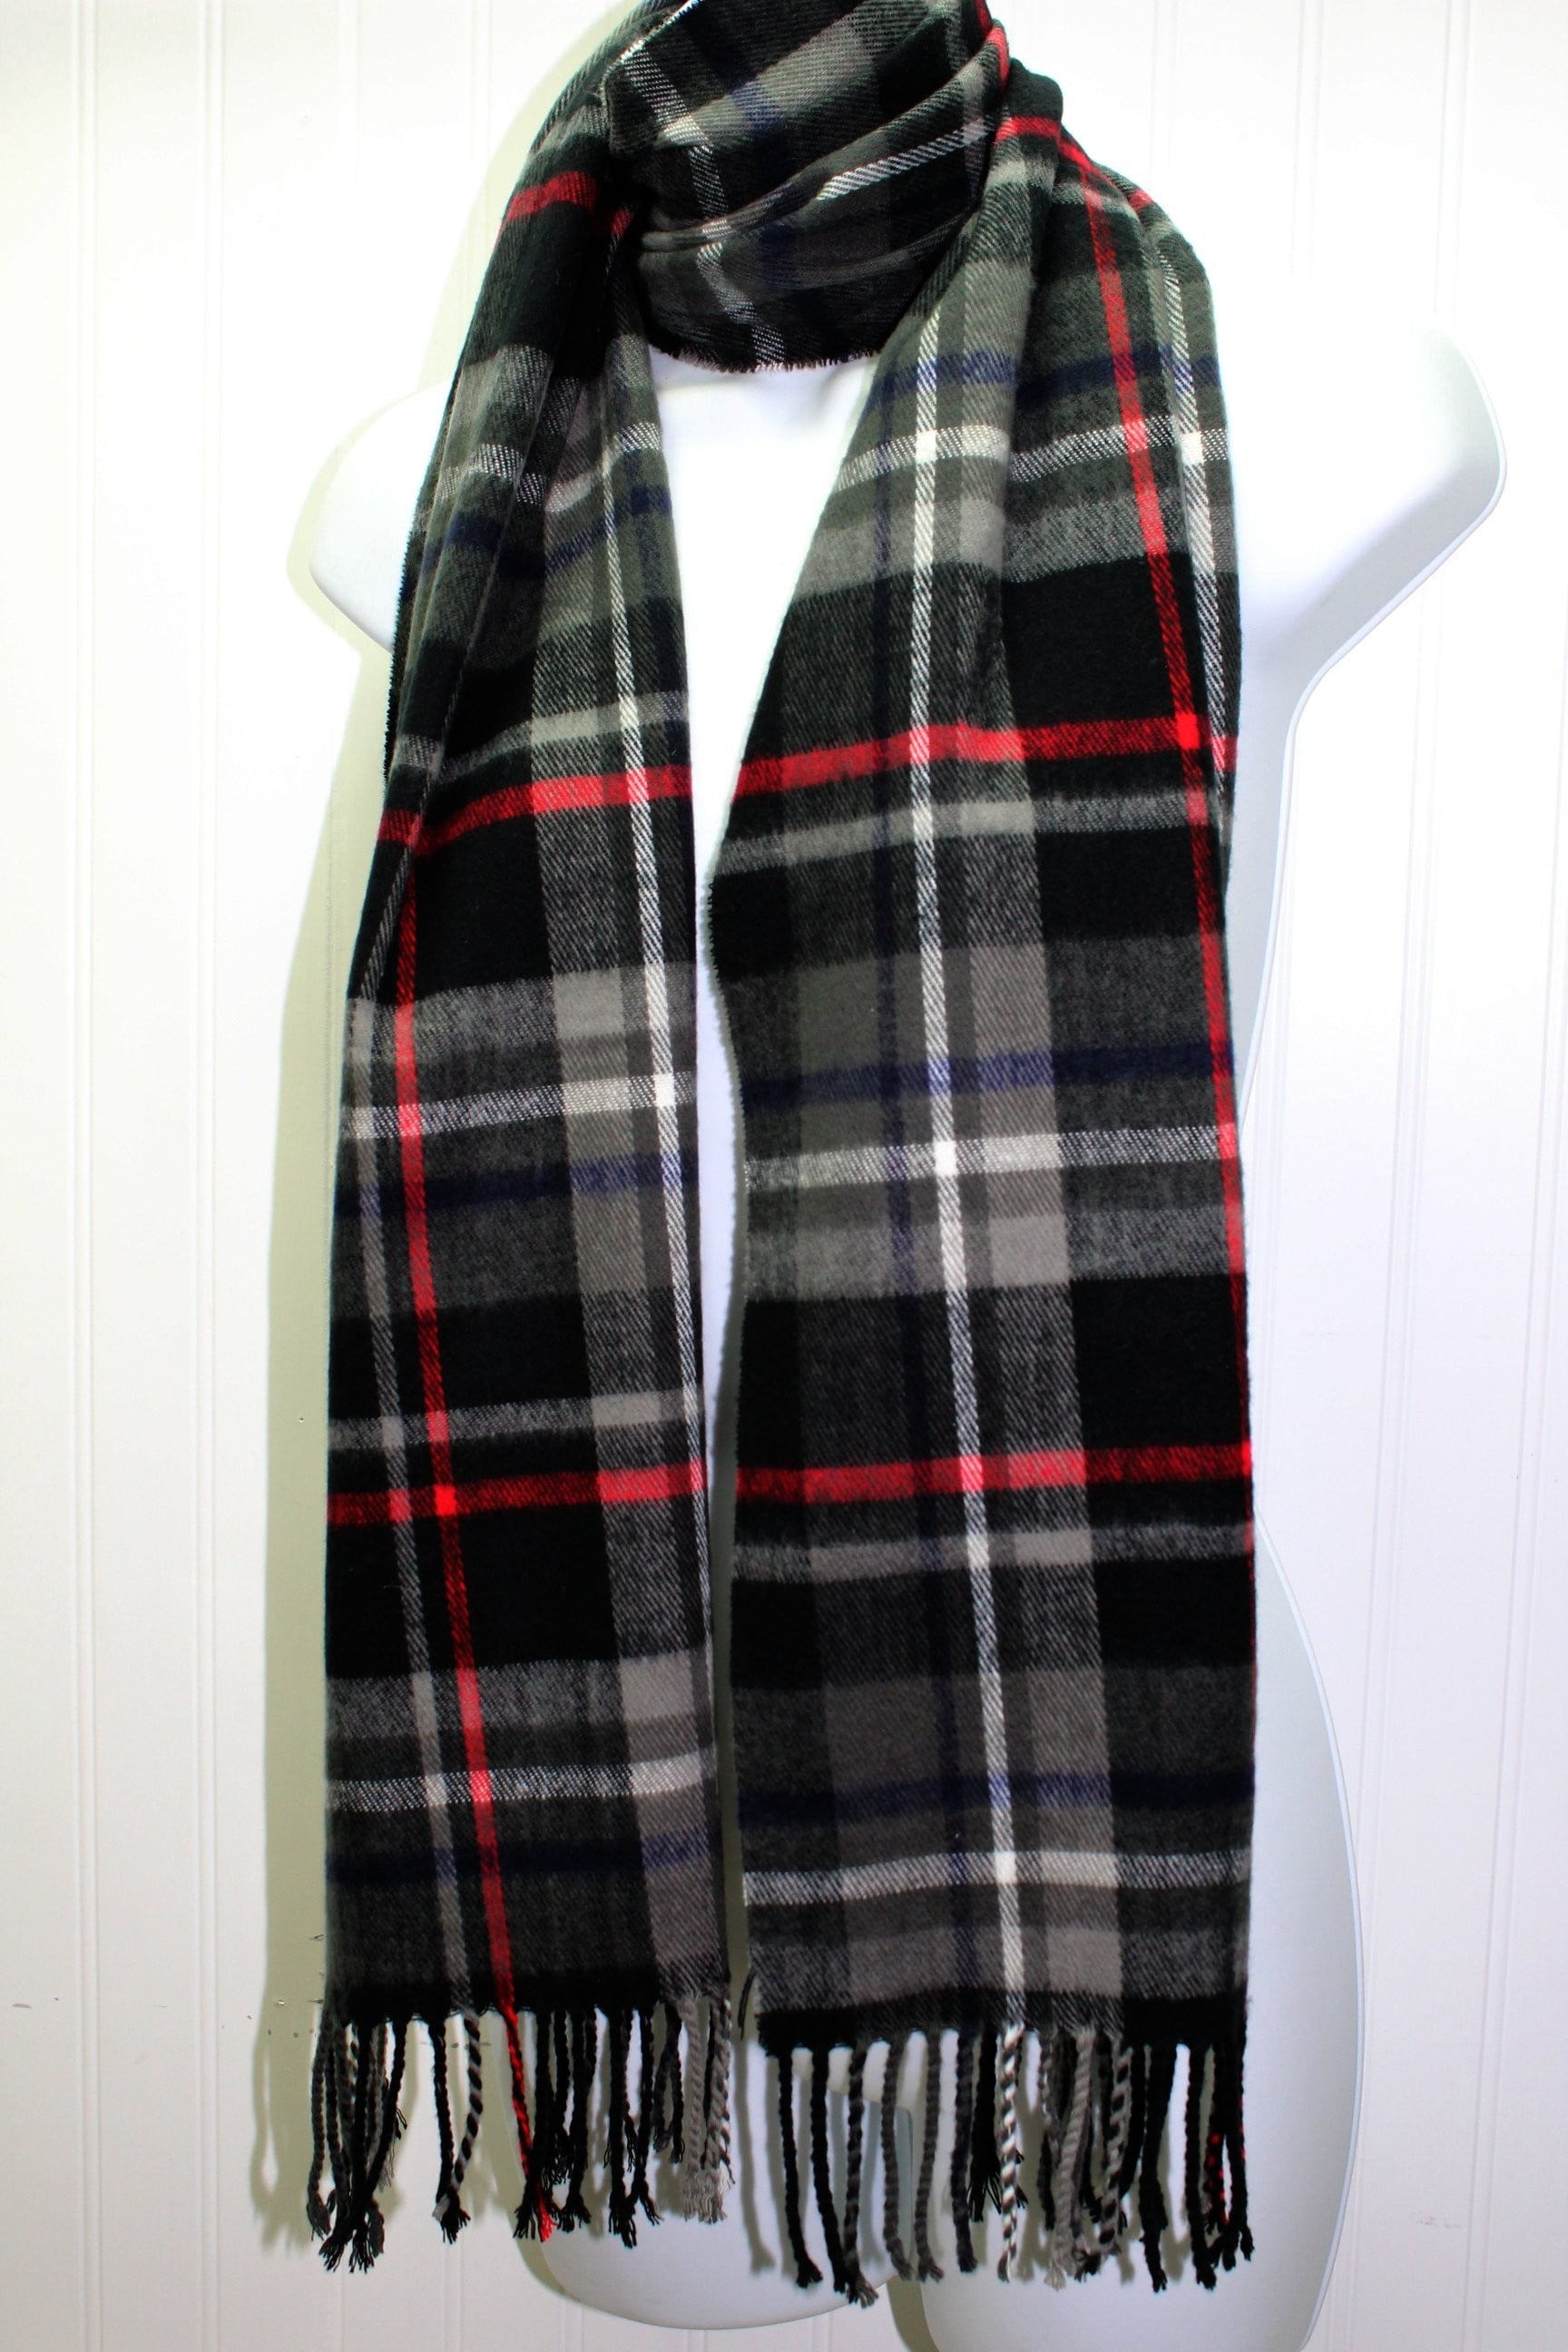 Unbranded Acrylic Scarf All Gender Plaid Black Grey Red Stripe X – Kitchen & Home